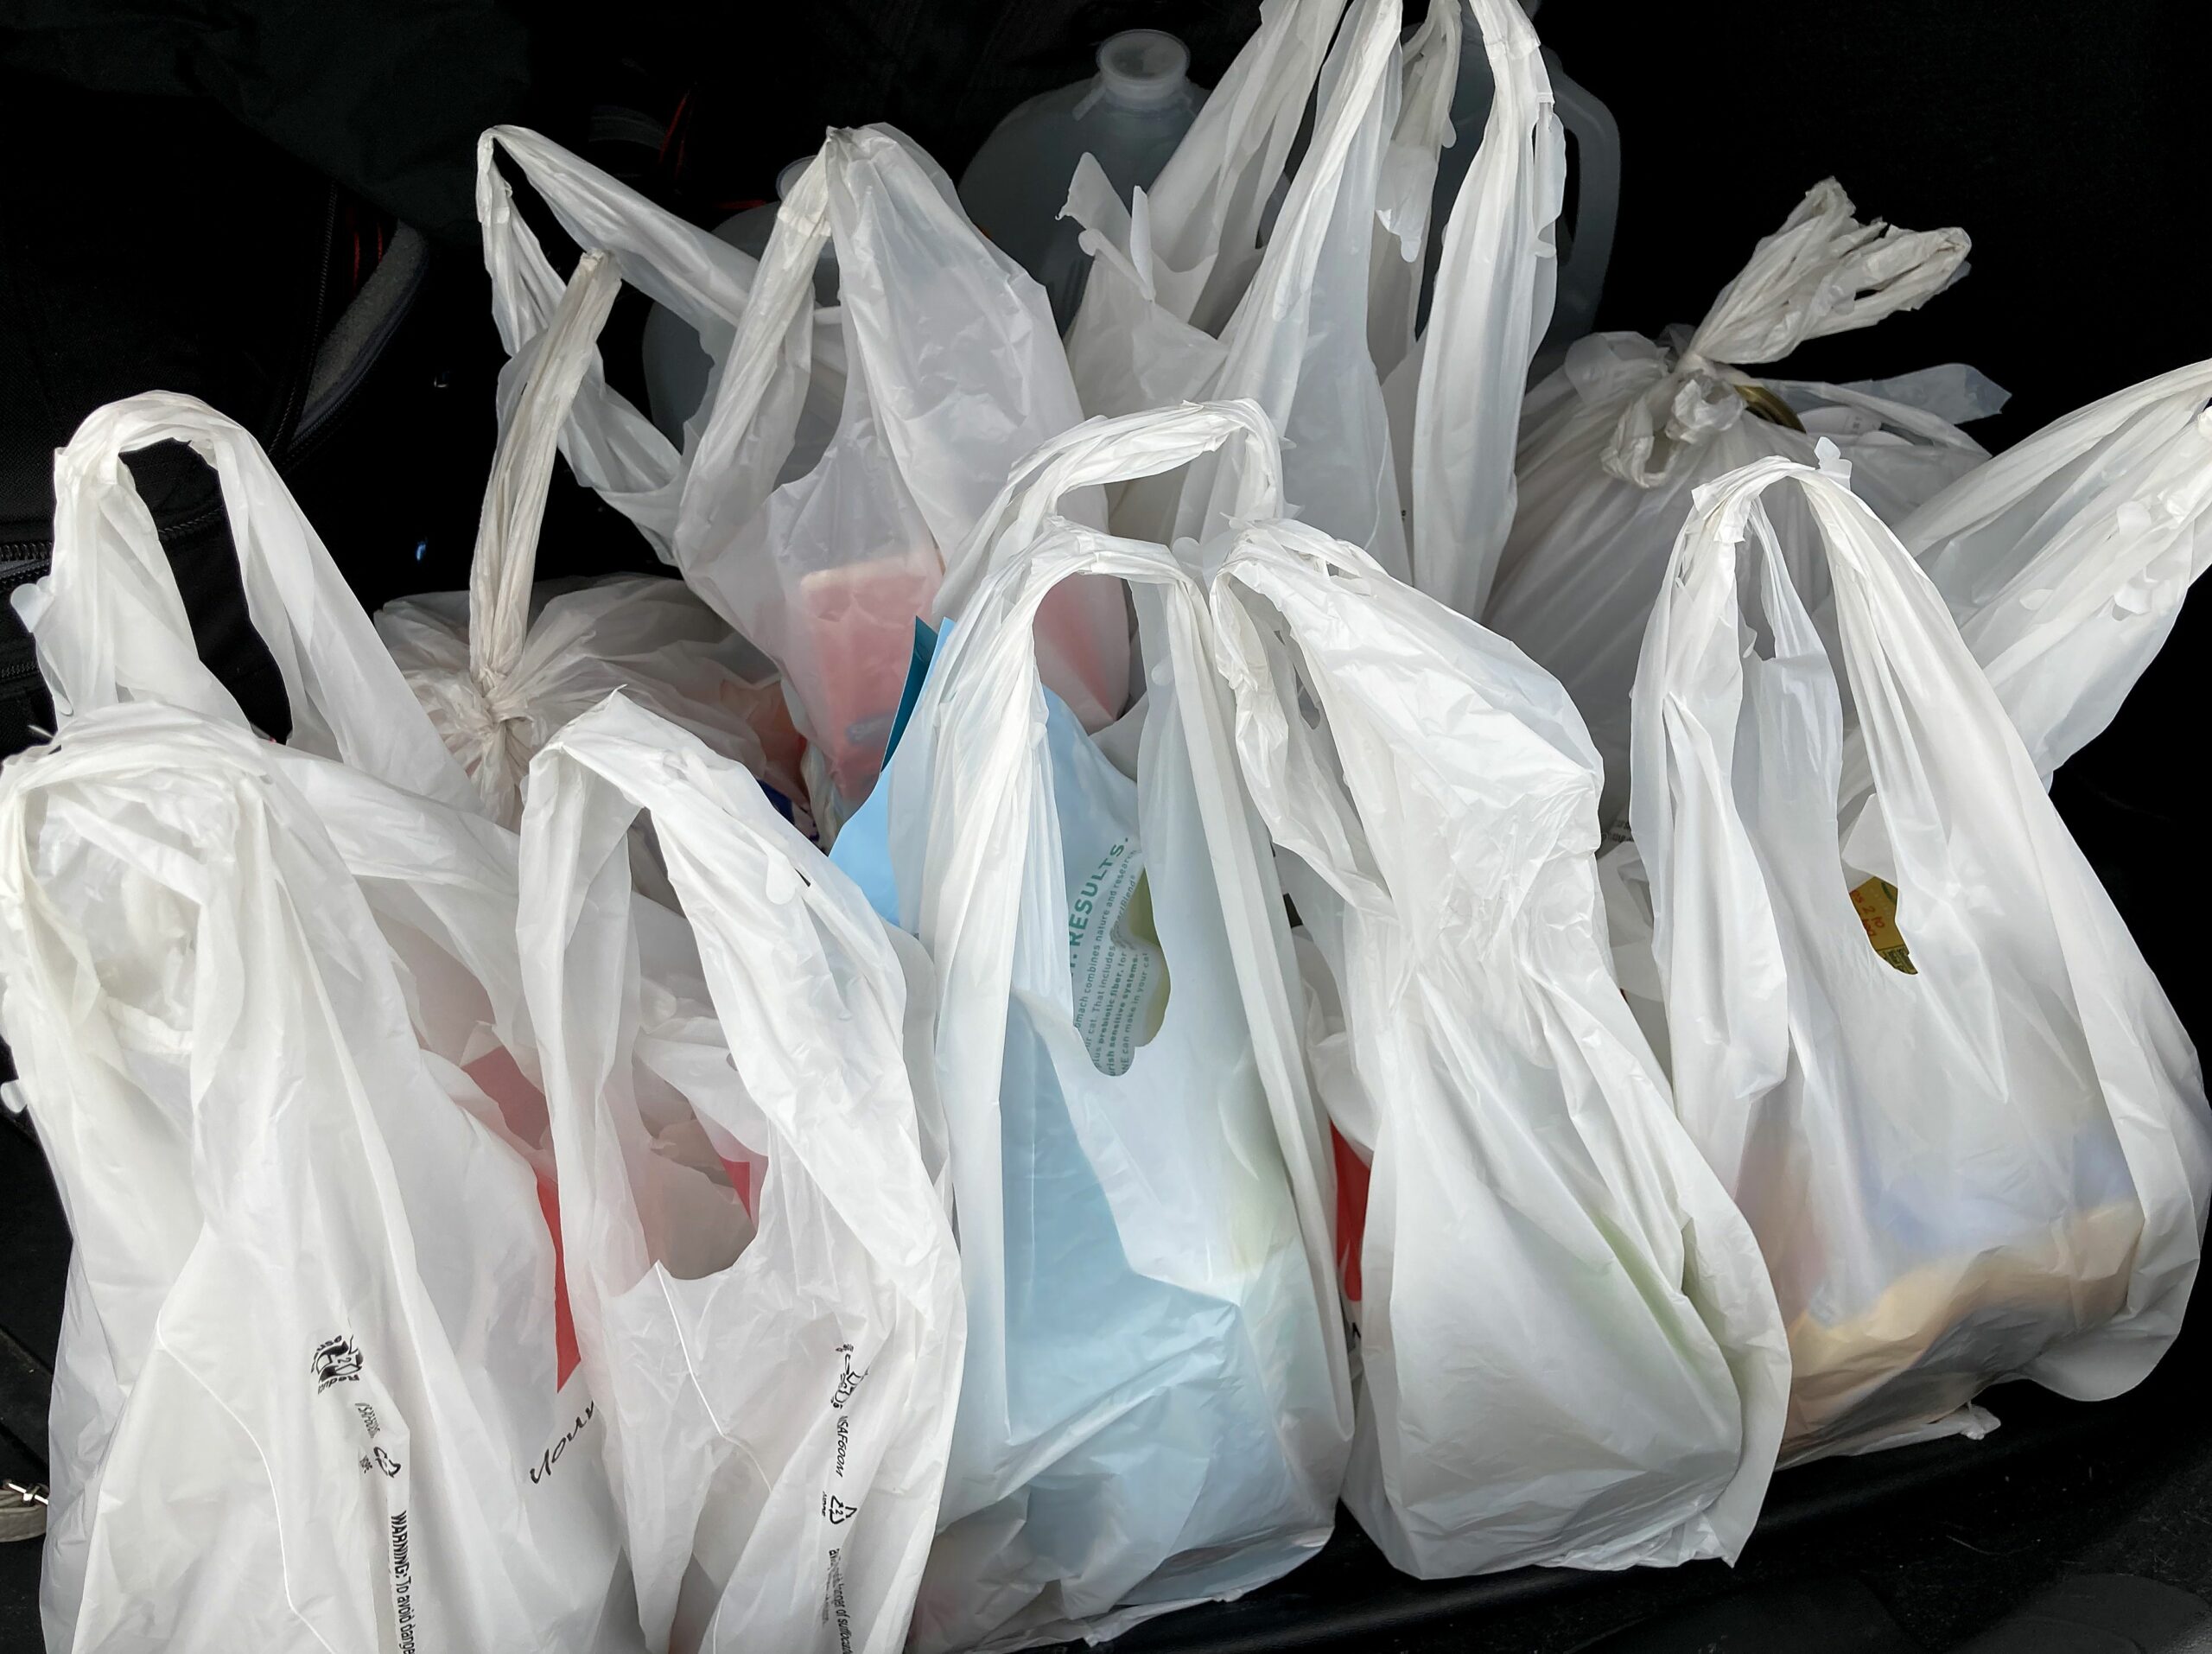 Government bans plastic bags below 40 microns